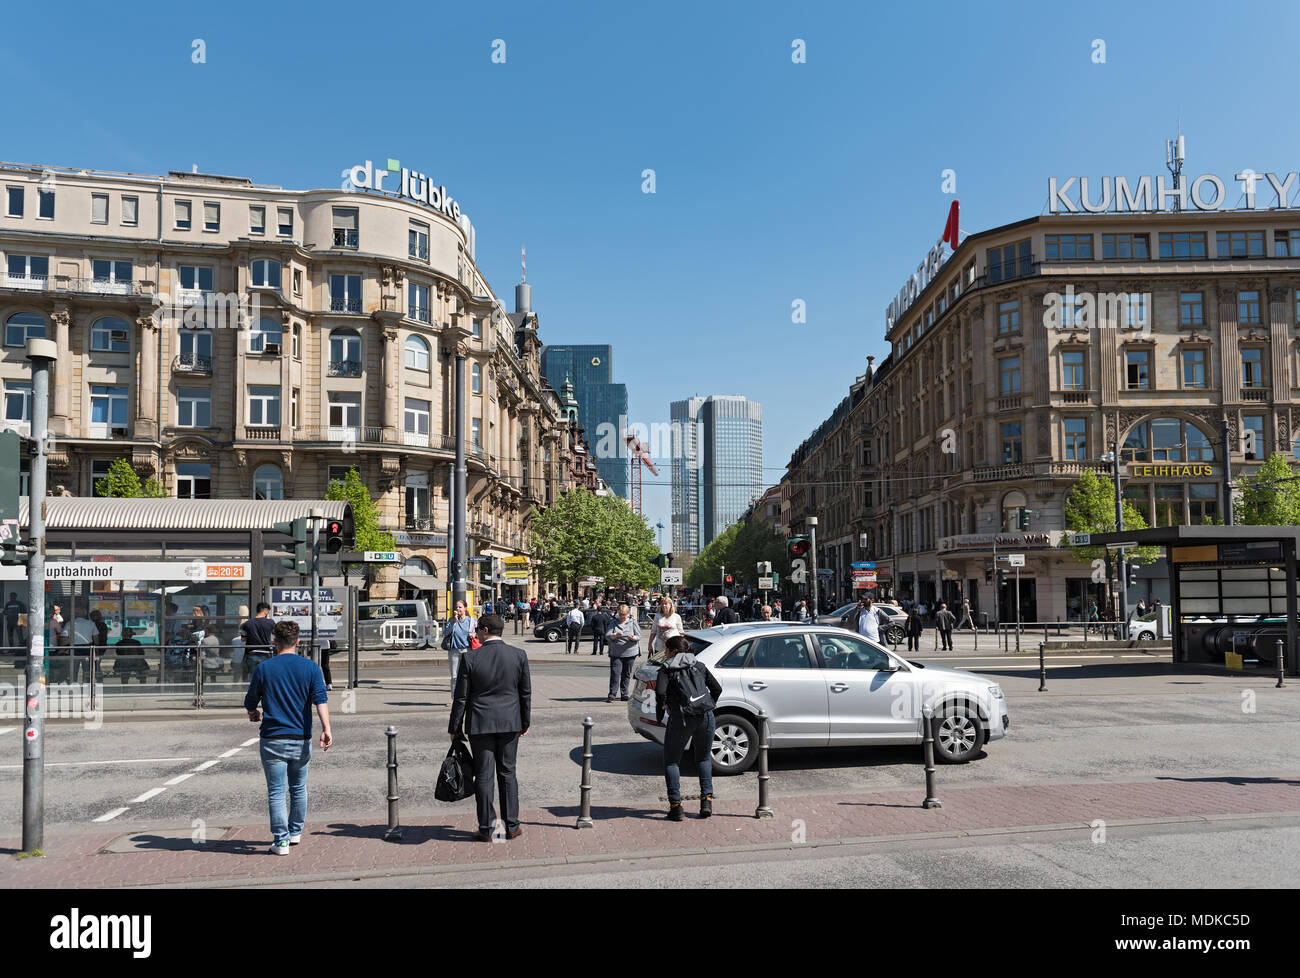 view of people on kaiserstrasse street and the square in front of main station, frankfurt am main, germany Stock Photo